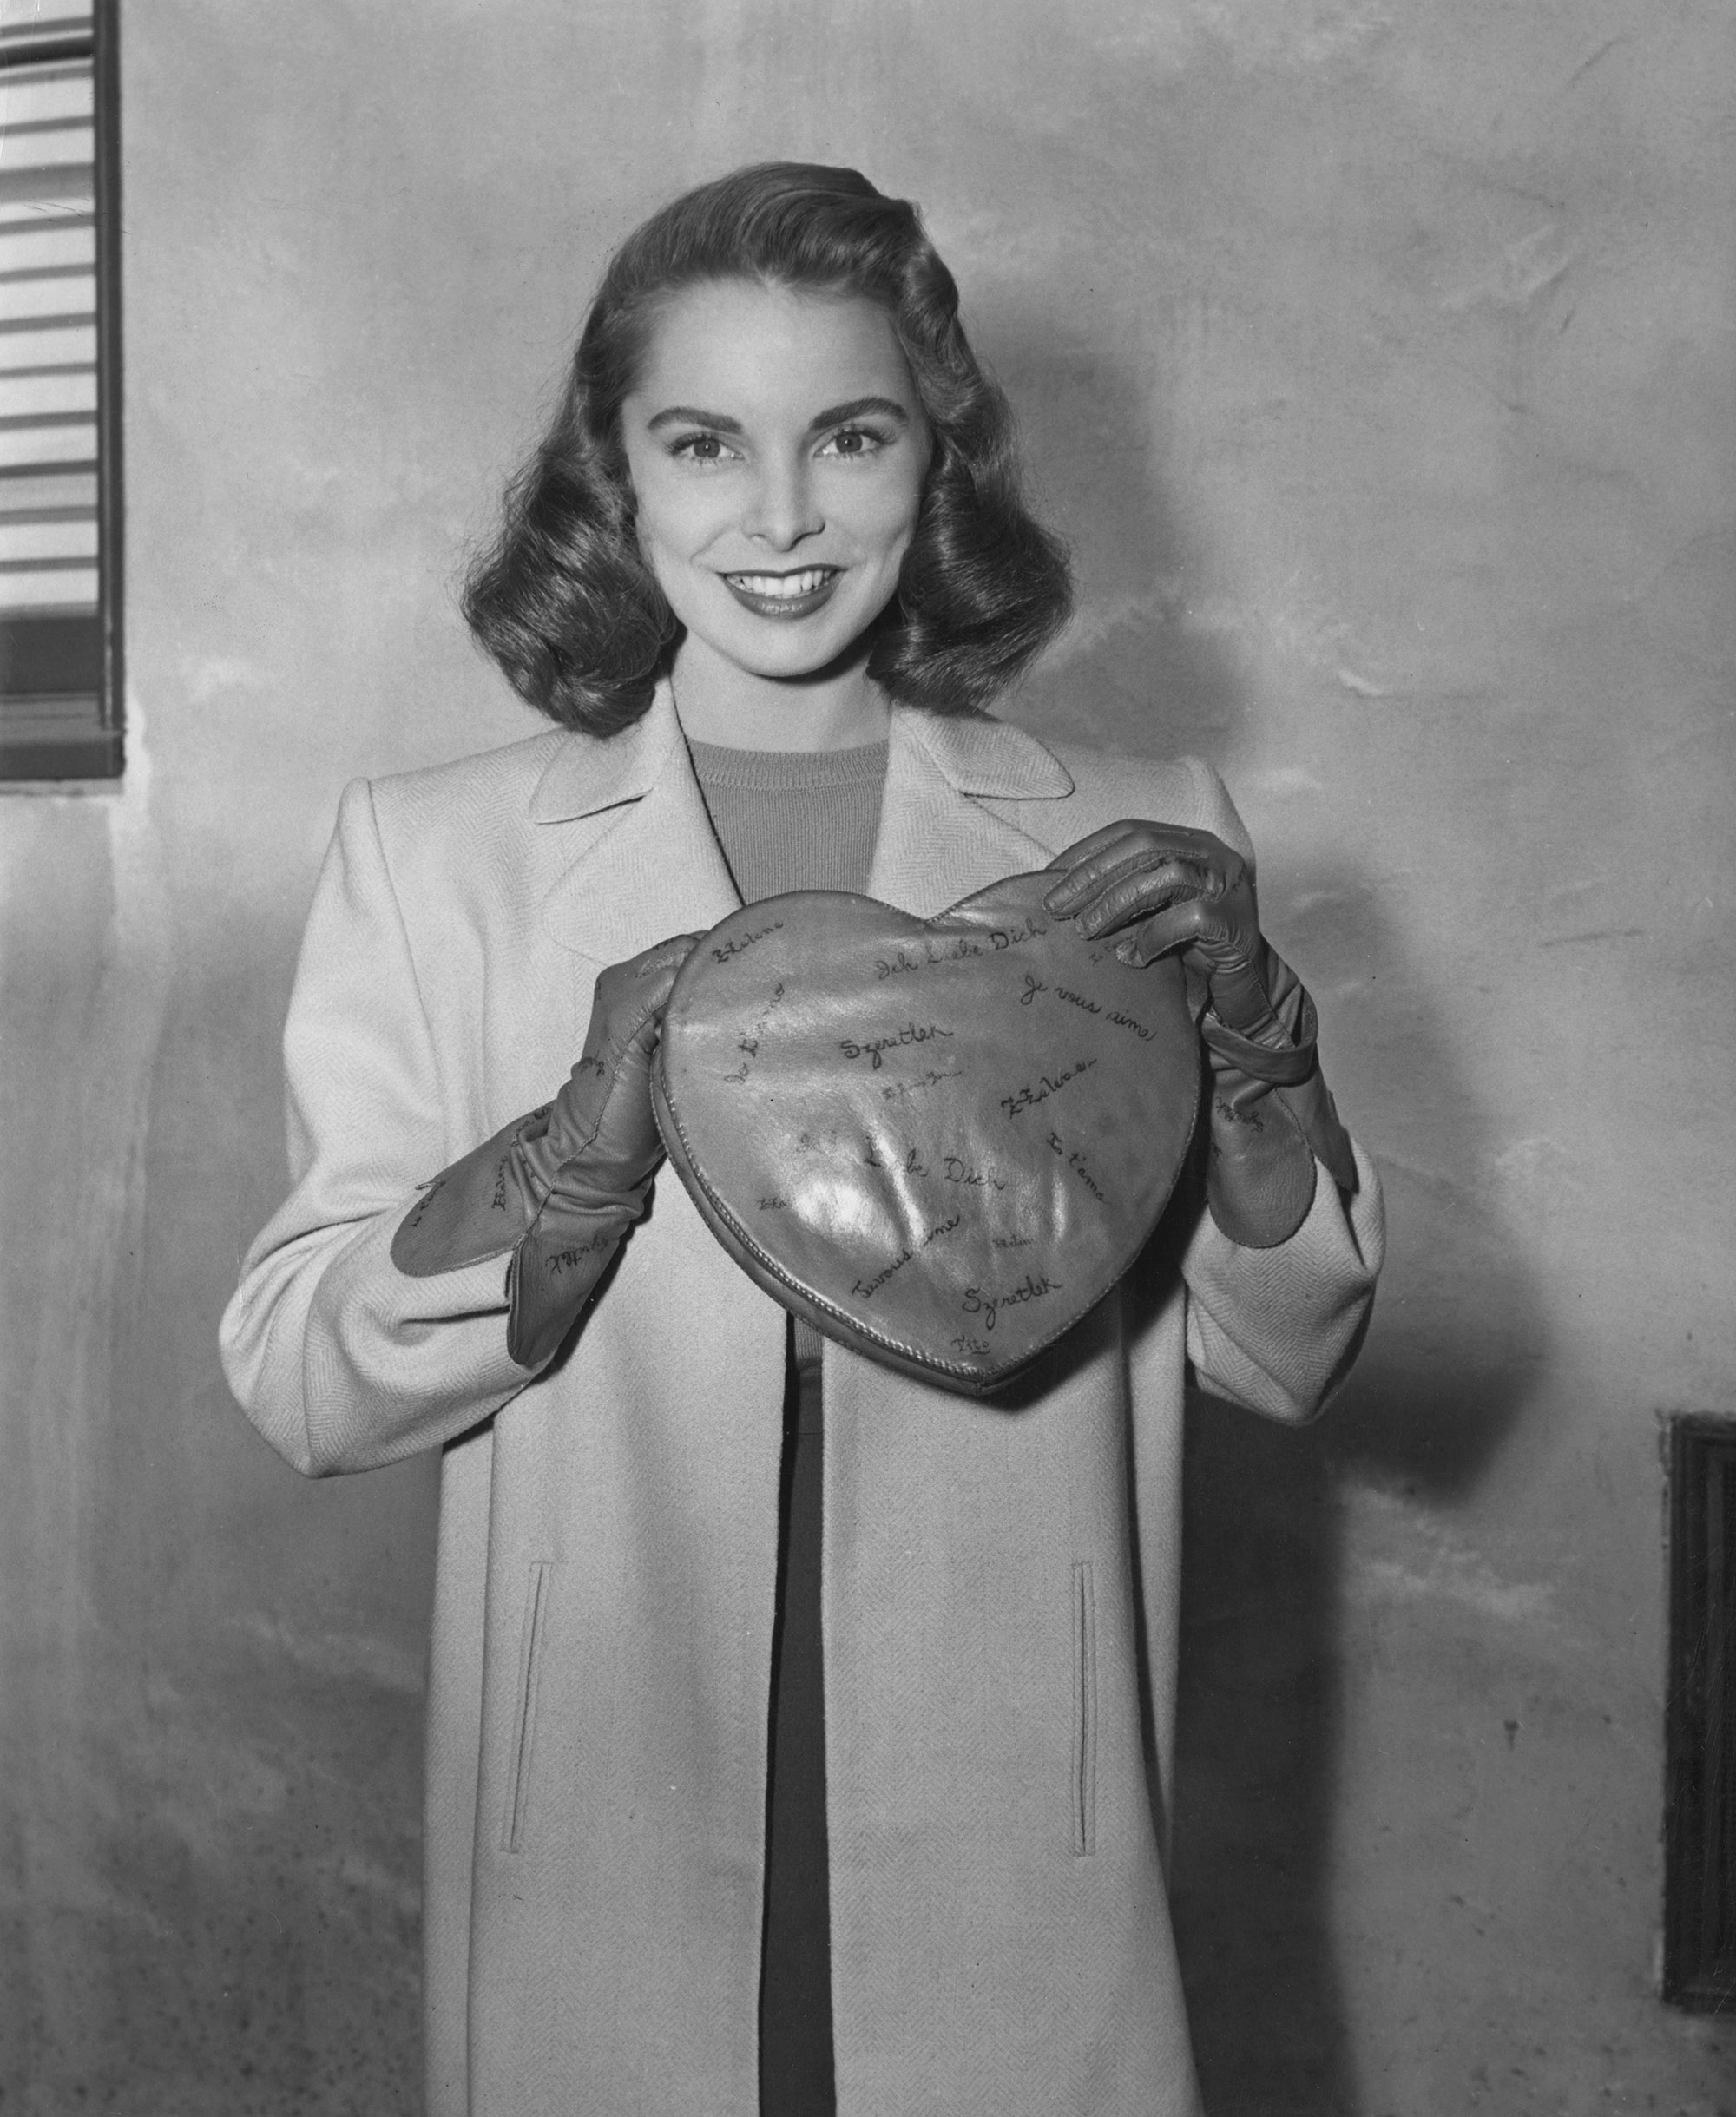 Janet Leigh models Valentine's Day accessories, a heart-shaped bag in red kidskin with the words 'I Love You' in various languages, and gloves to match, circa 1945.